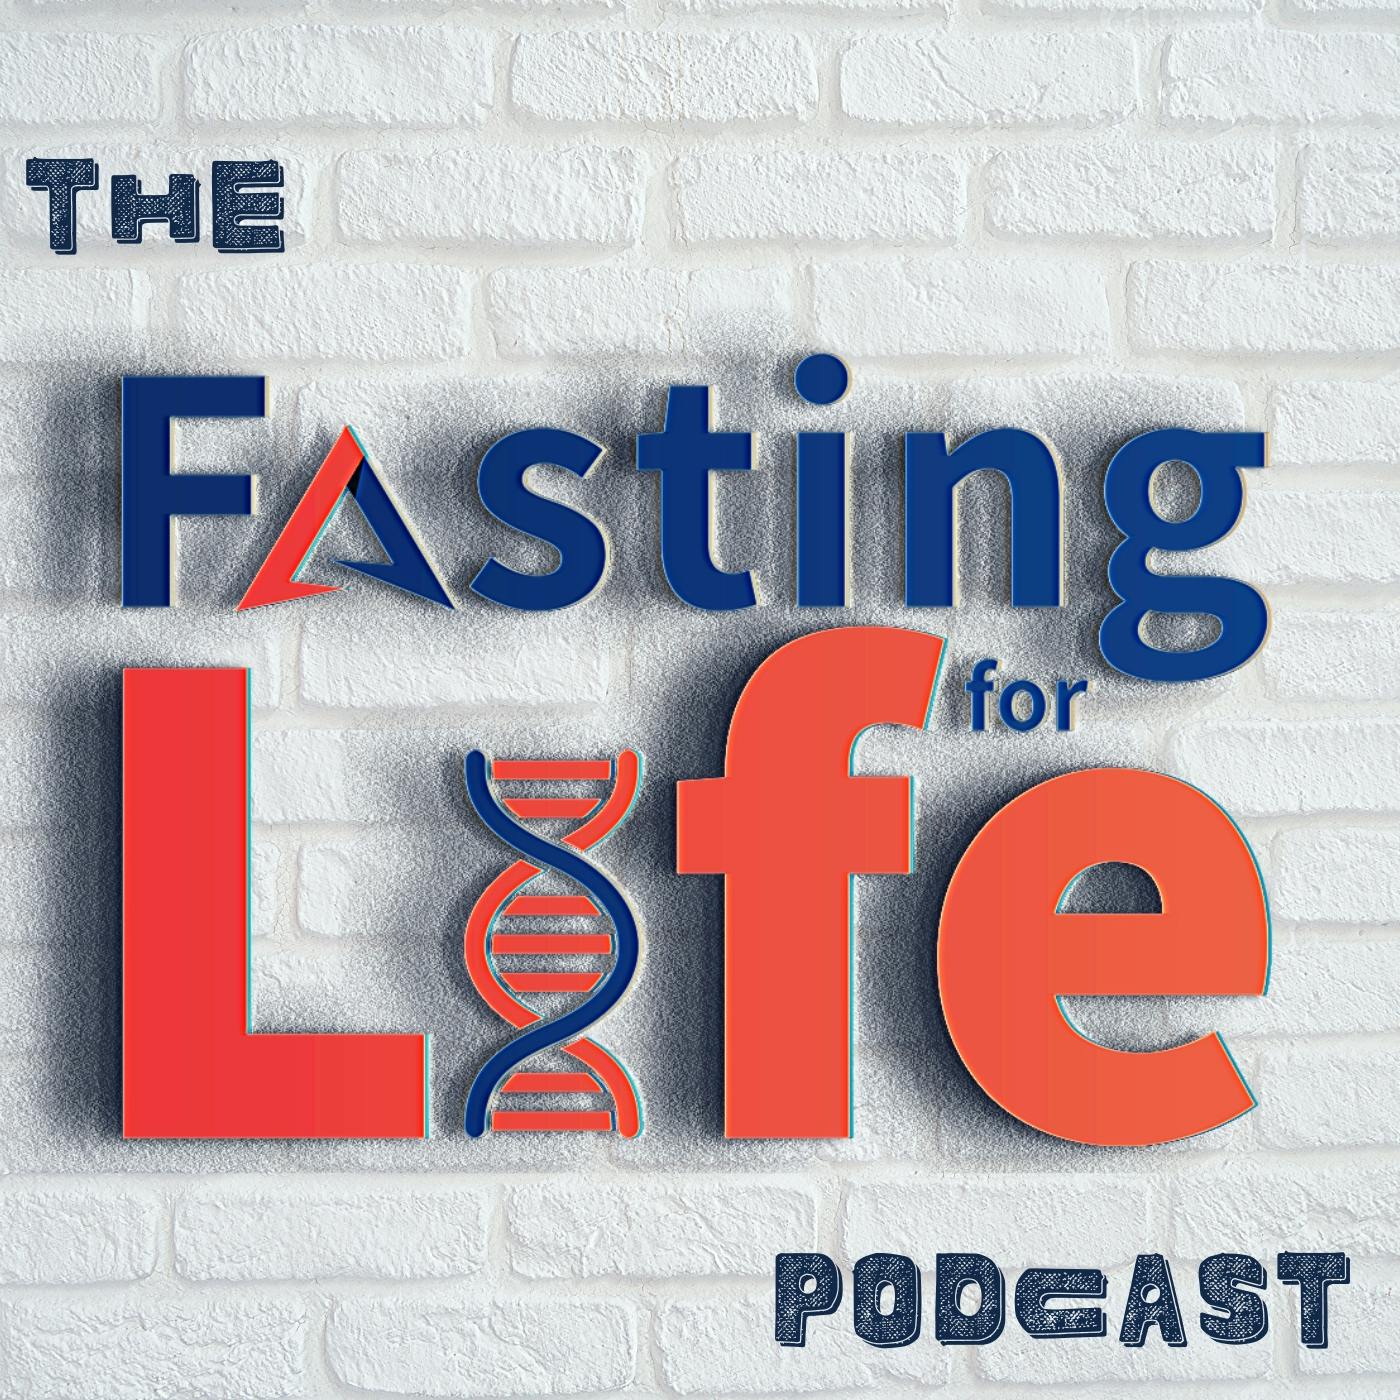 Ep. 68 - Good Fasting Habits more important than Longer Fasts? Sticking to long-term health goals | Health Coaching & Accountability, Power in a Social Fasting Group | Free Intermittent Fasting OMAD P